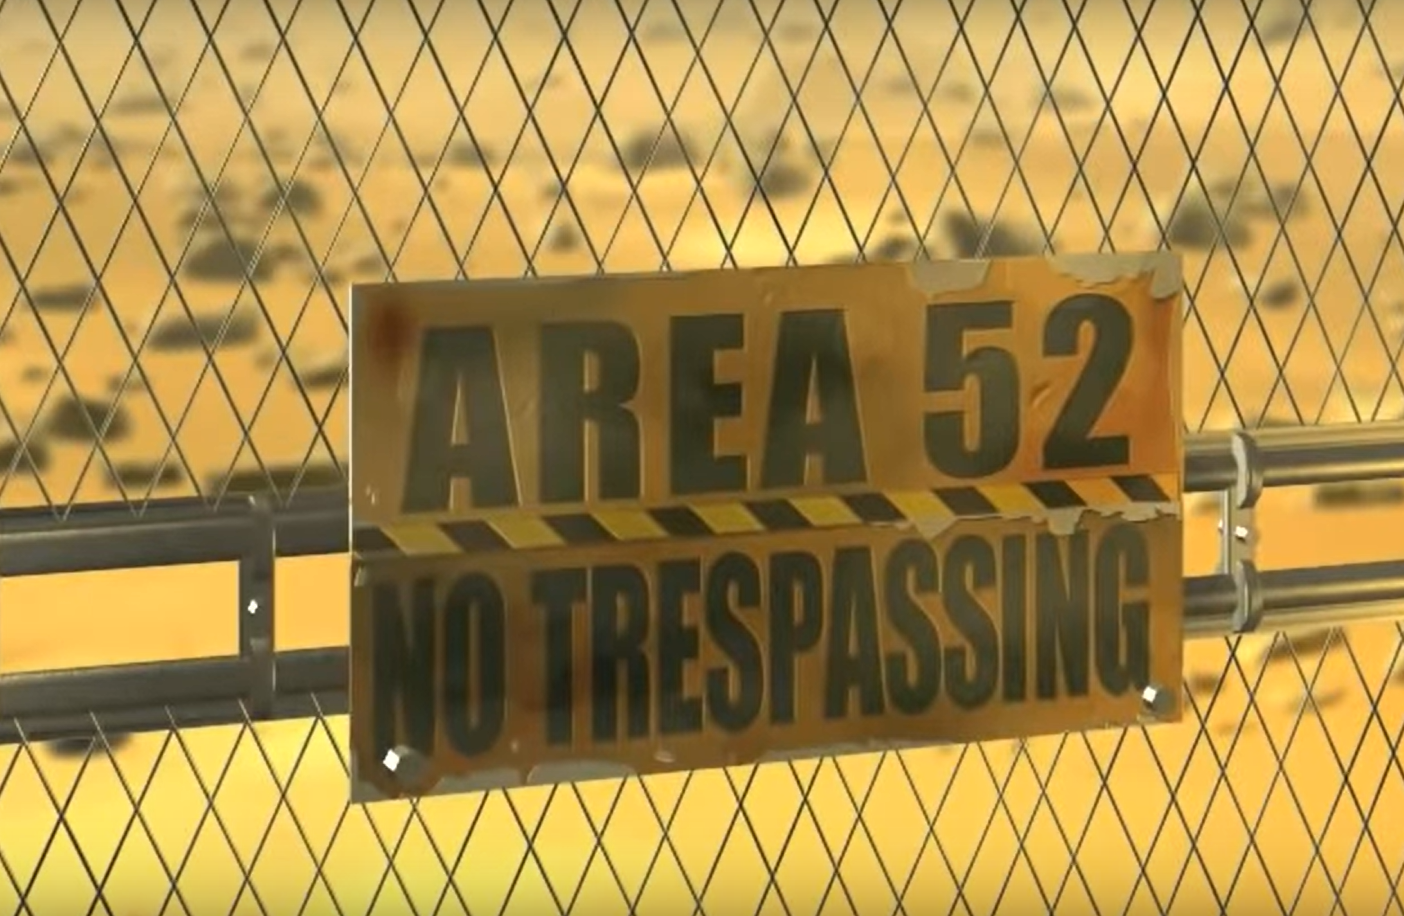 a sign with the text 'Area 52. No trespassing.'